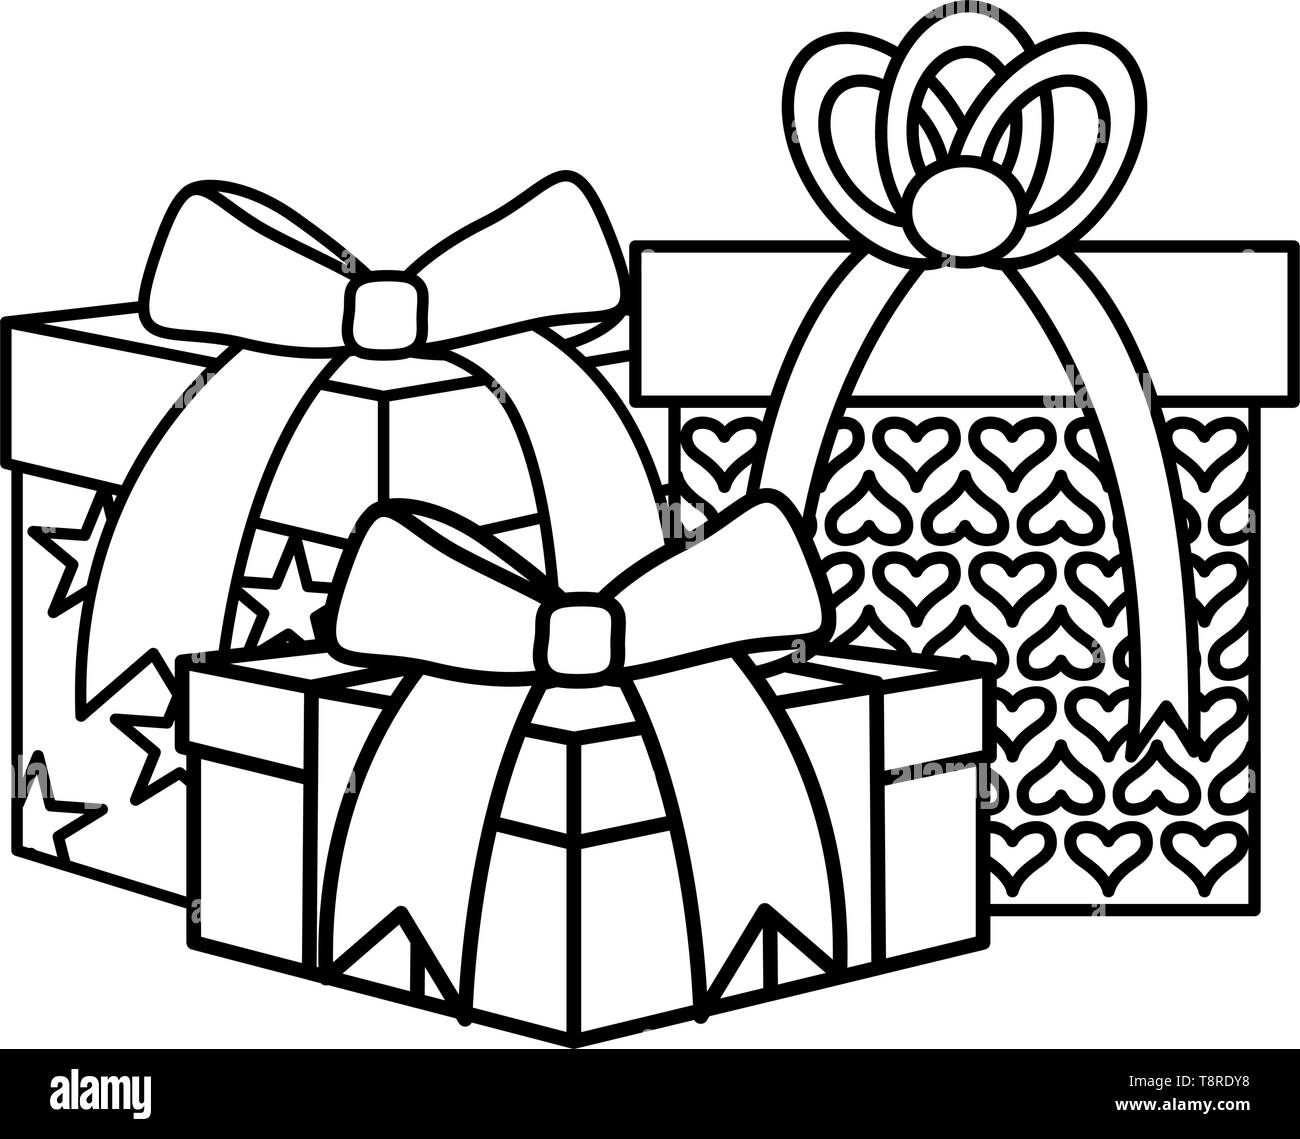 Black and white Christmas ribbon with simple - Stock Illustration  [107235324] - PIXTA